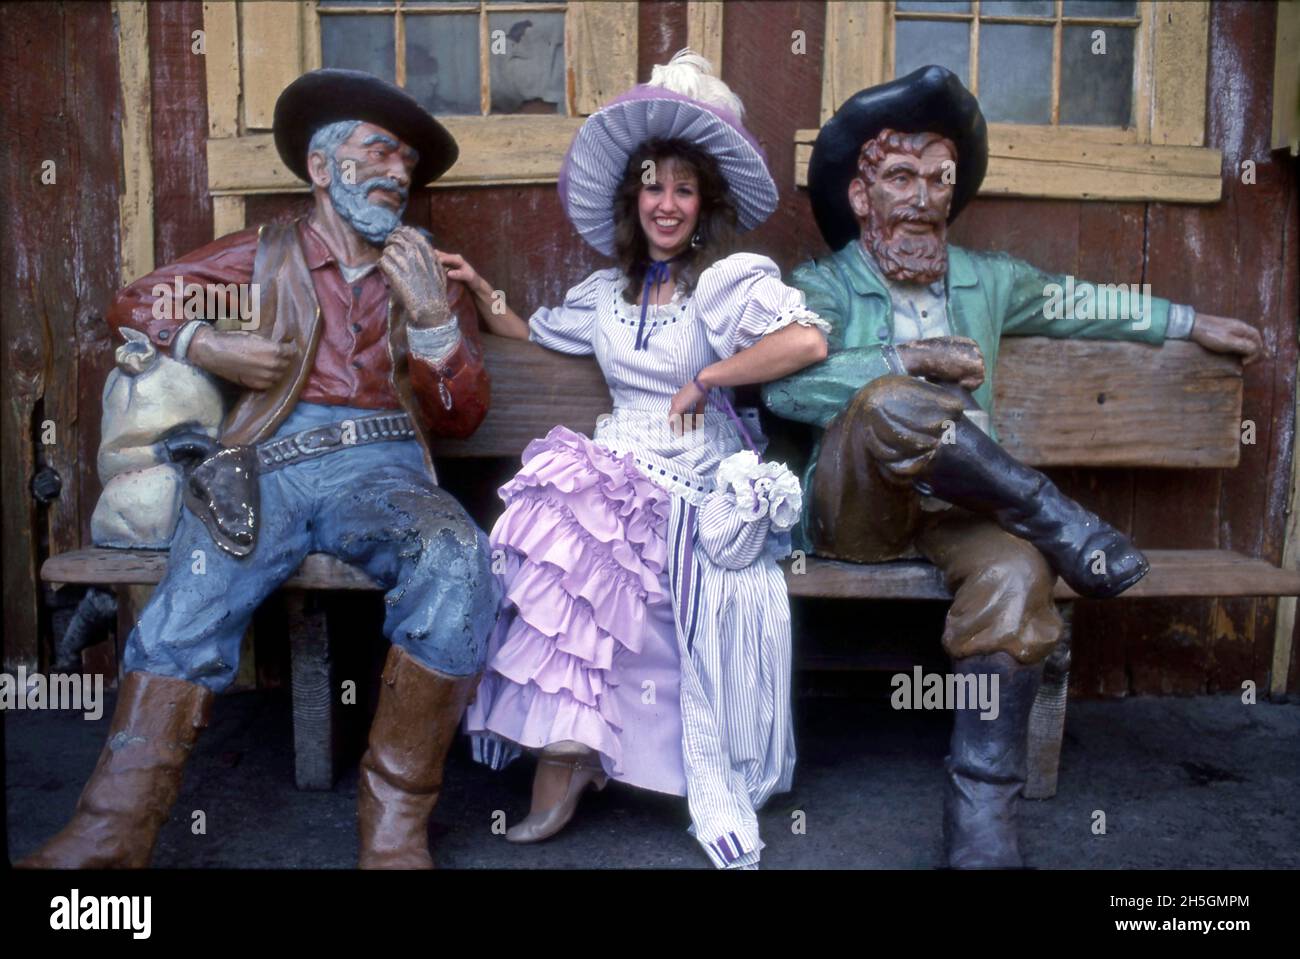 Woman in period costume posing with wood carved figures of men from the Wild West period at Knott's amusement park in Buena Park, CA Stock Photo